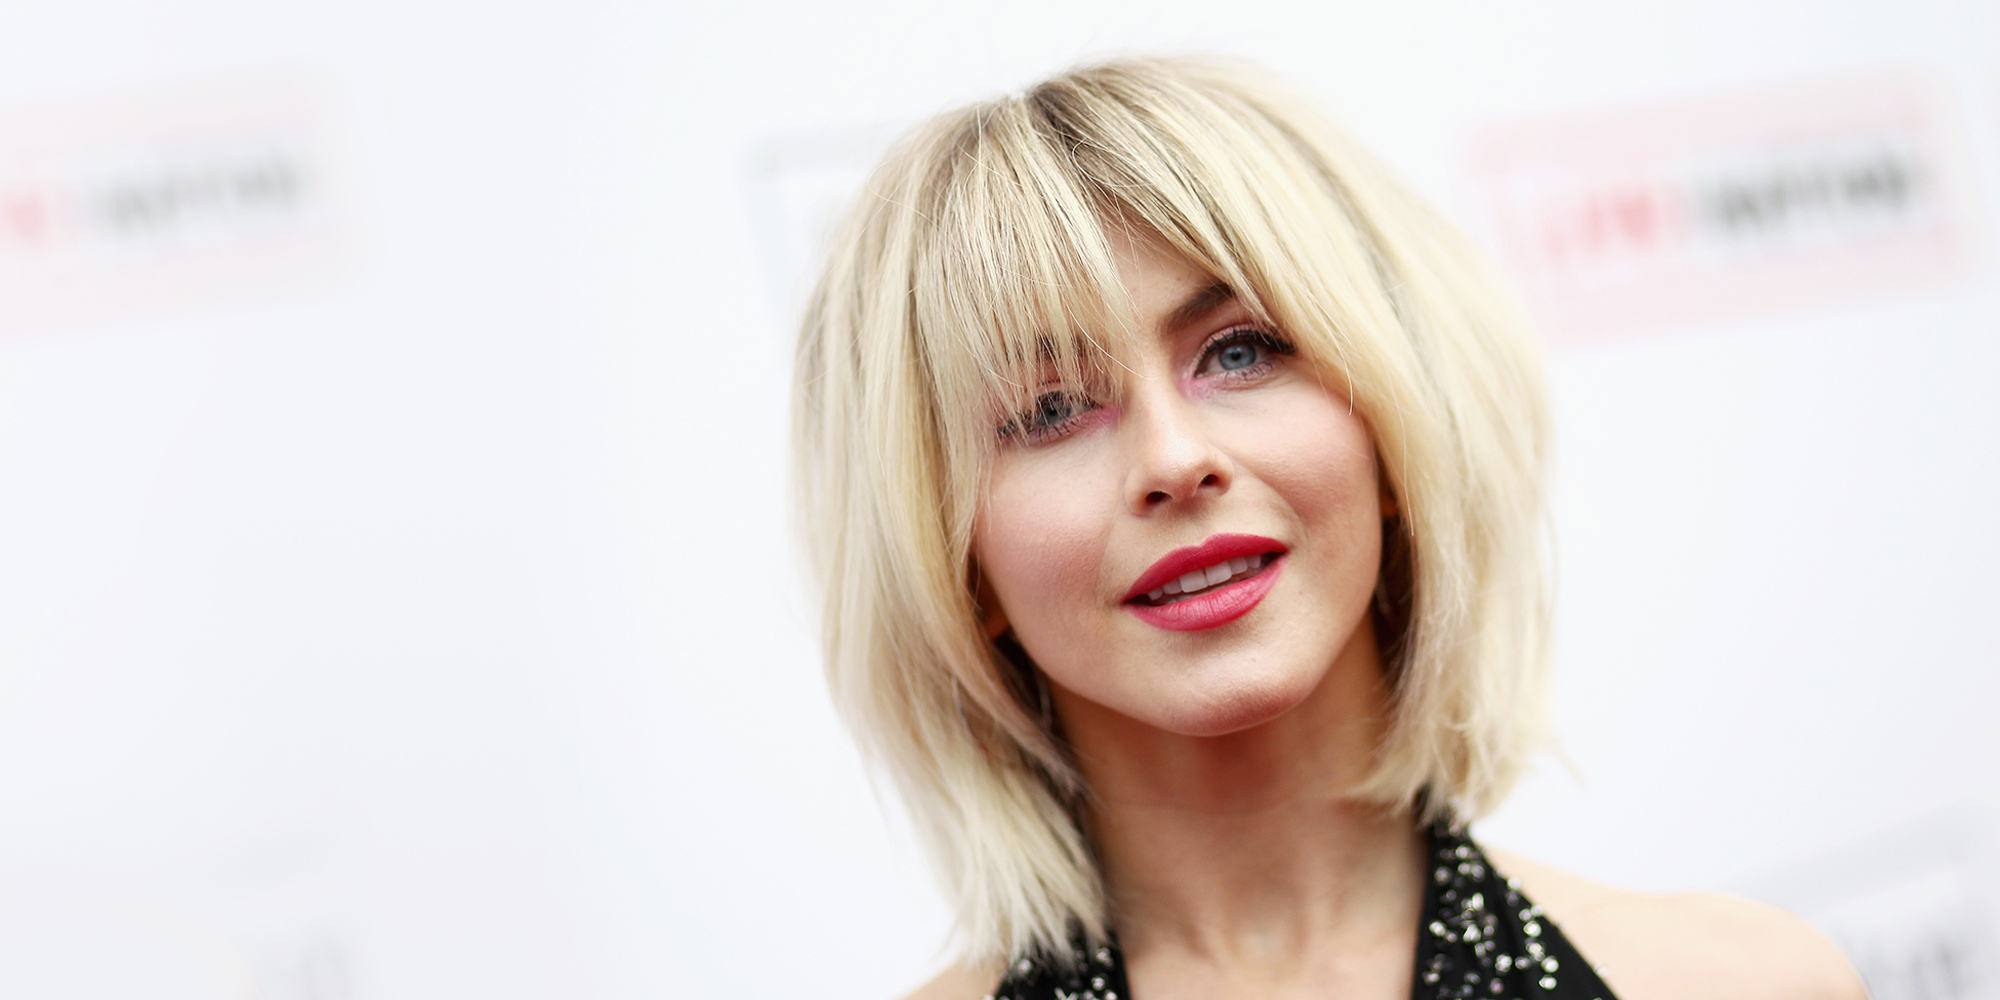 The Butterfly Cut Is The Only Voluminous Style You Need. Here's How To Make  It Work For You